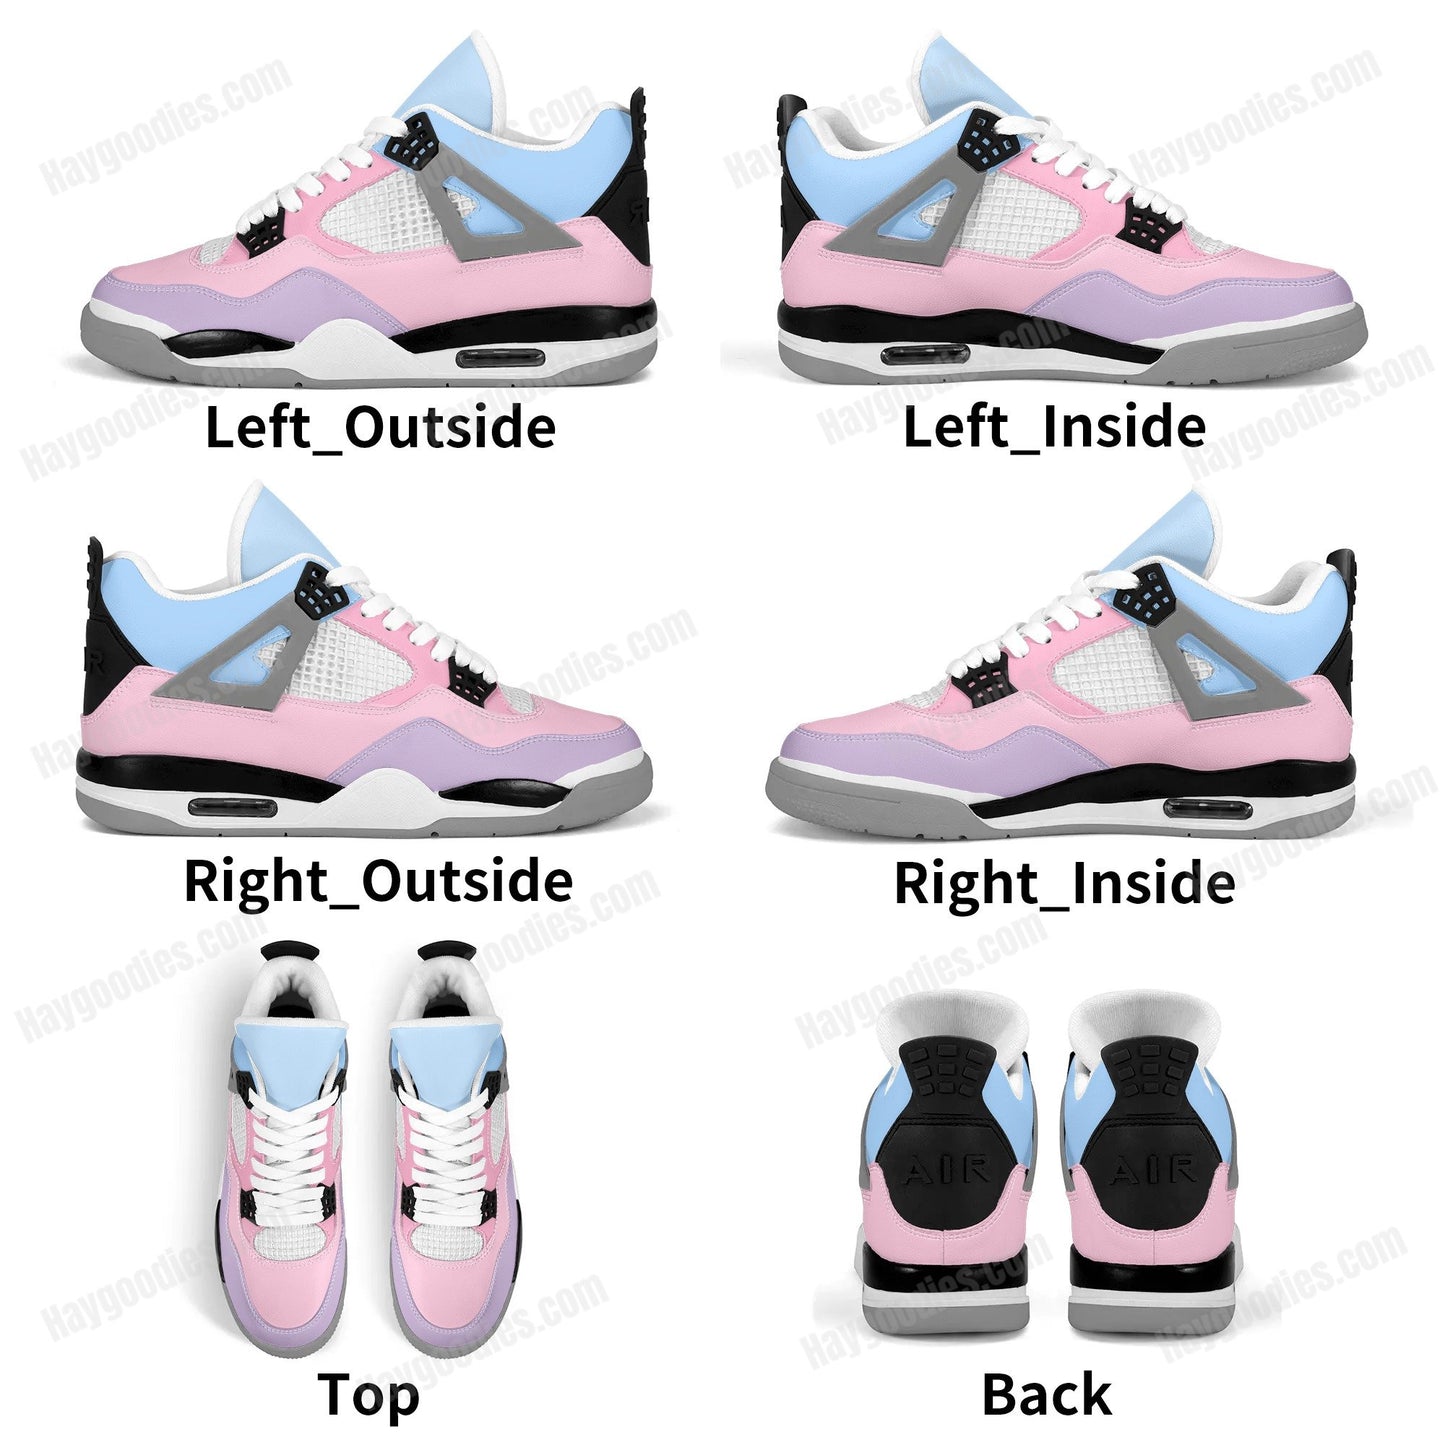 Cute Pastel Color Mix Retro Low Top J4 Style Sneakers